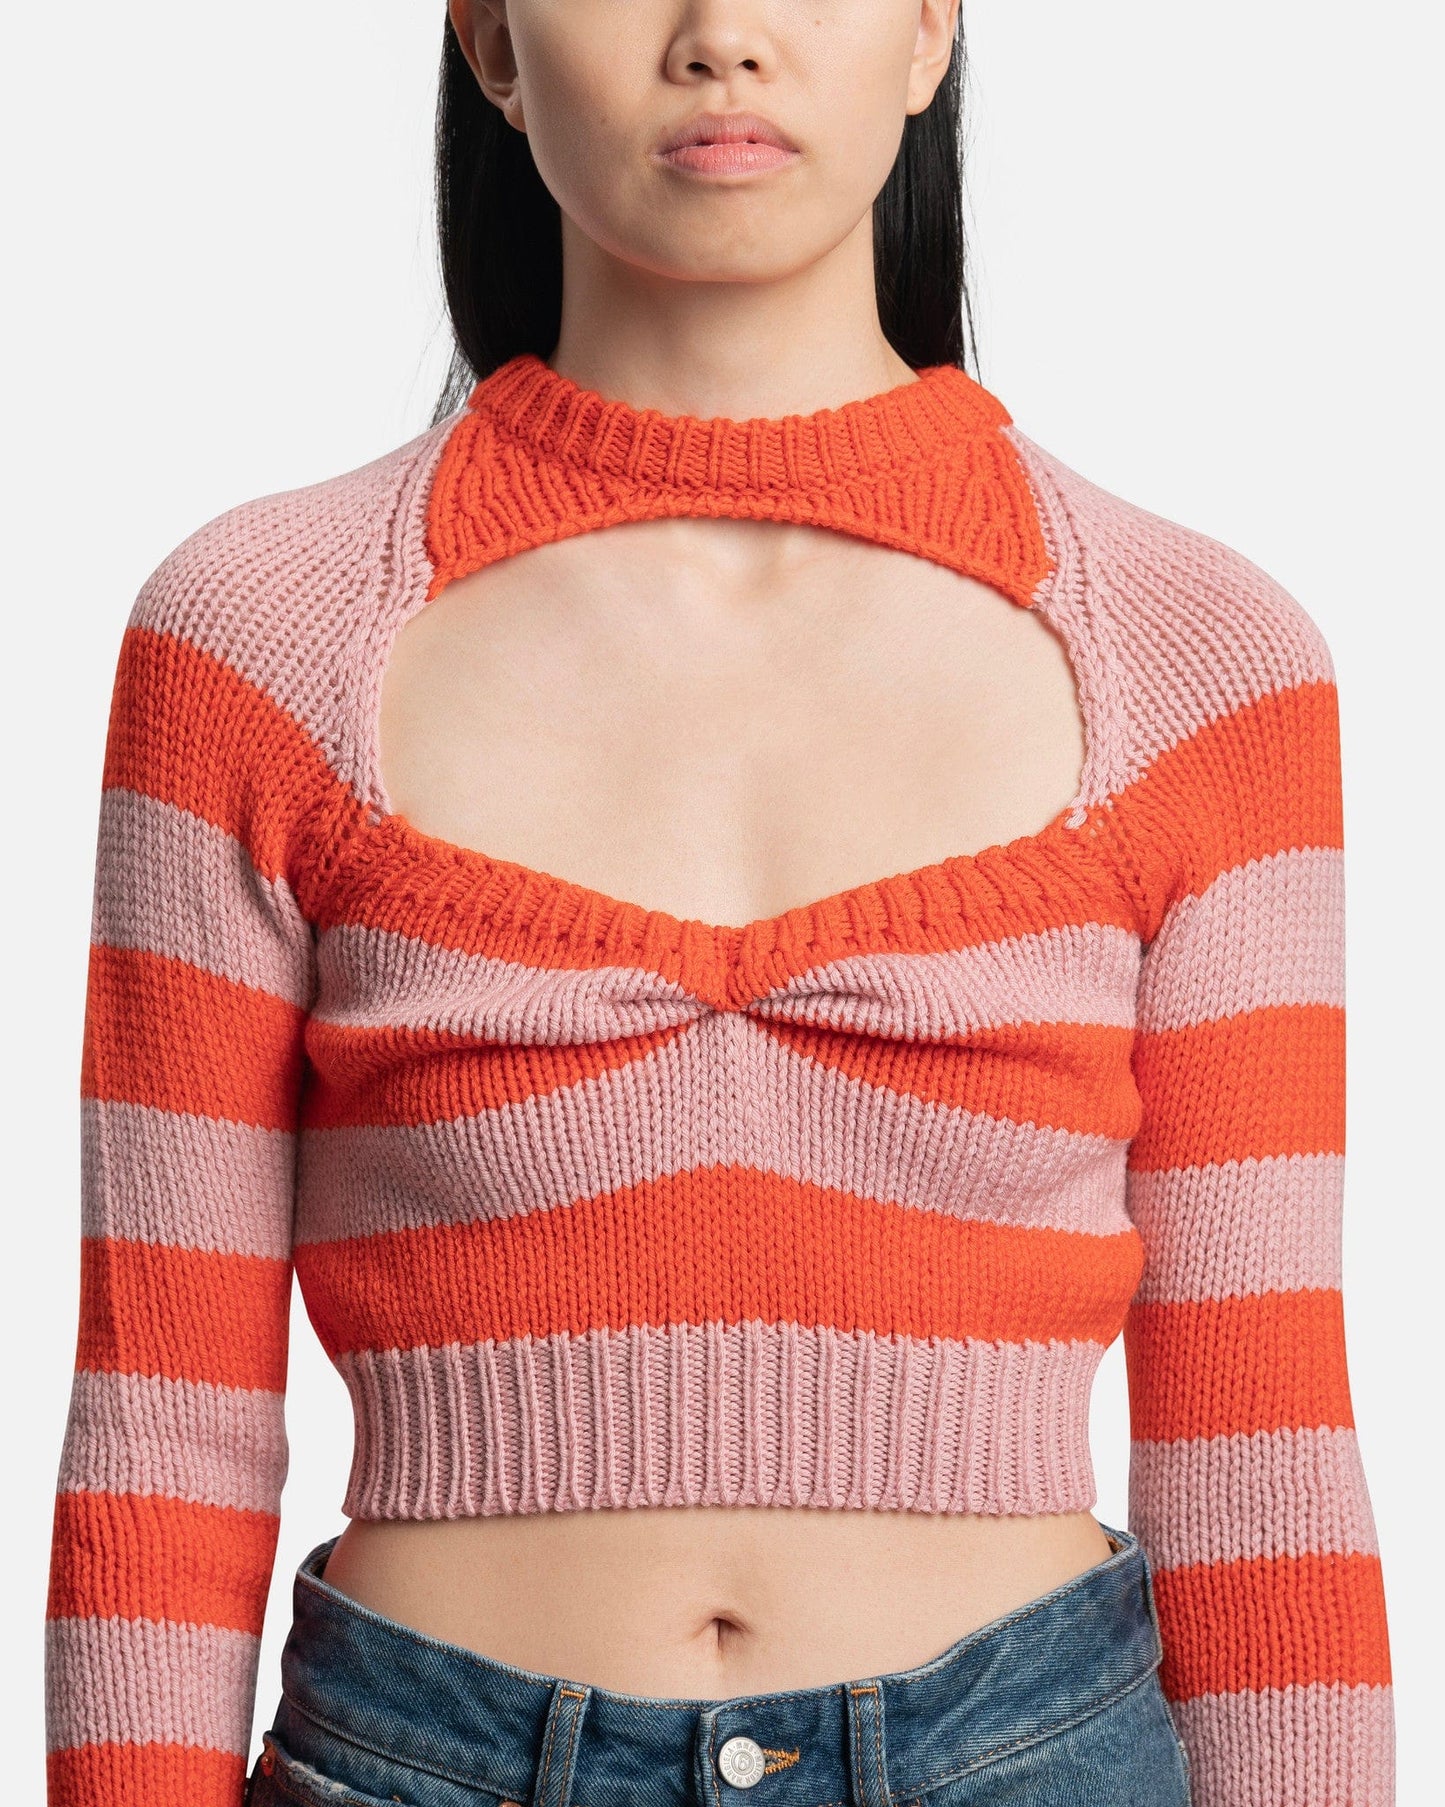 Marni Women Sweaters Striped Wool Cable Knit Cardigan in Cinder Rose